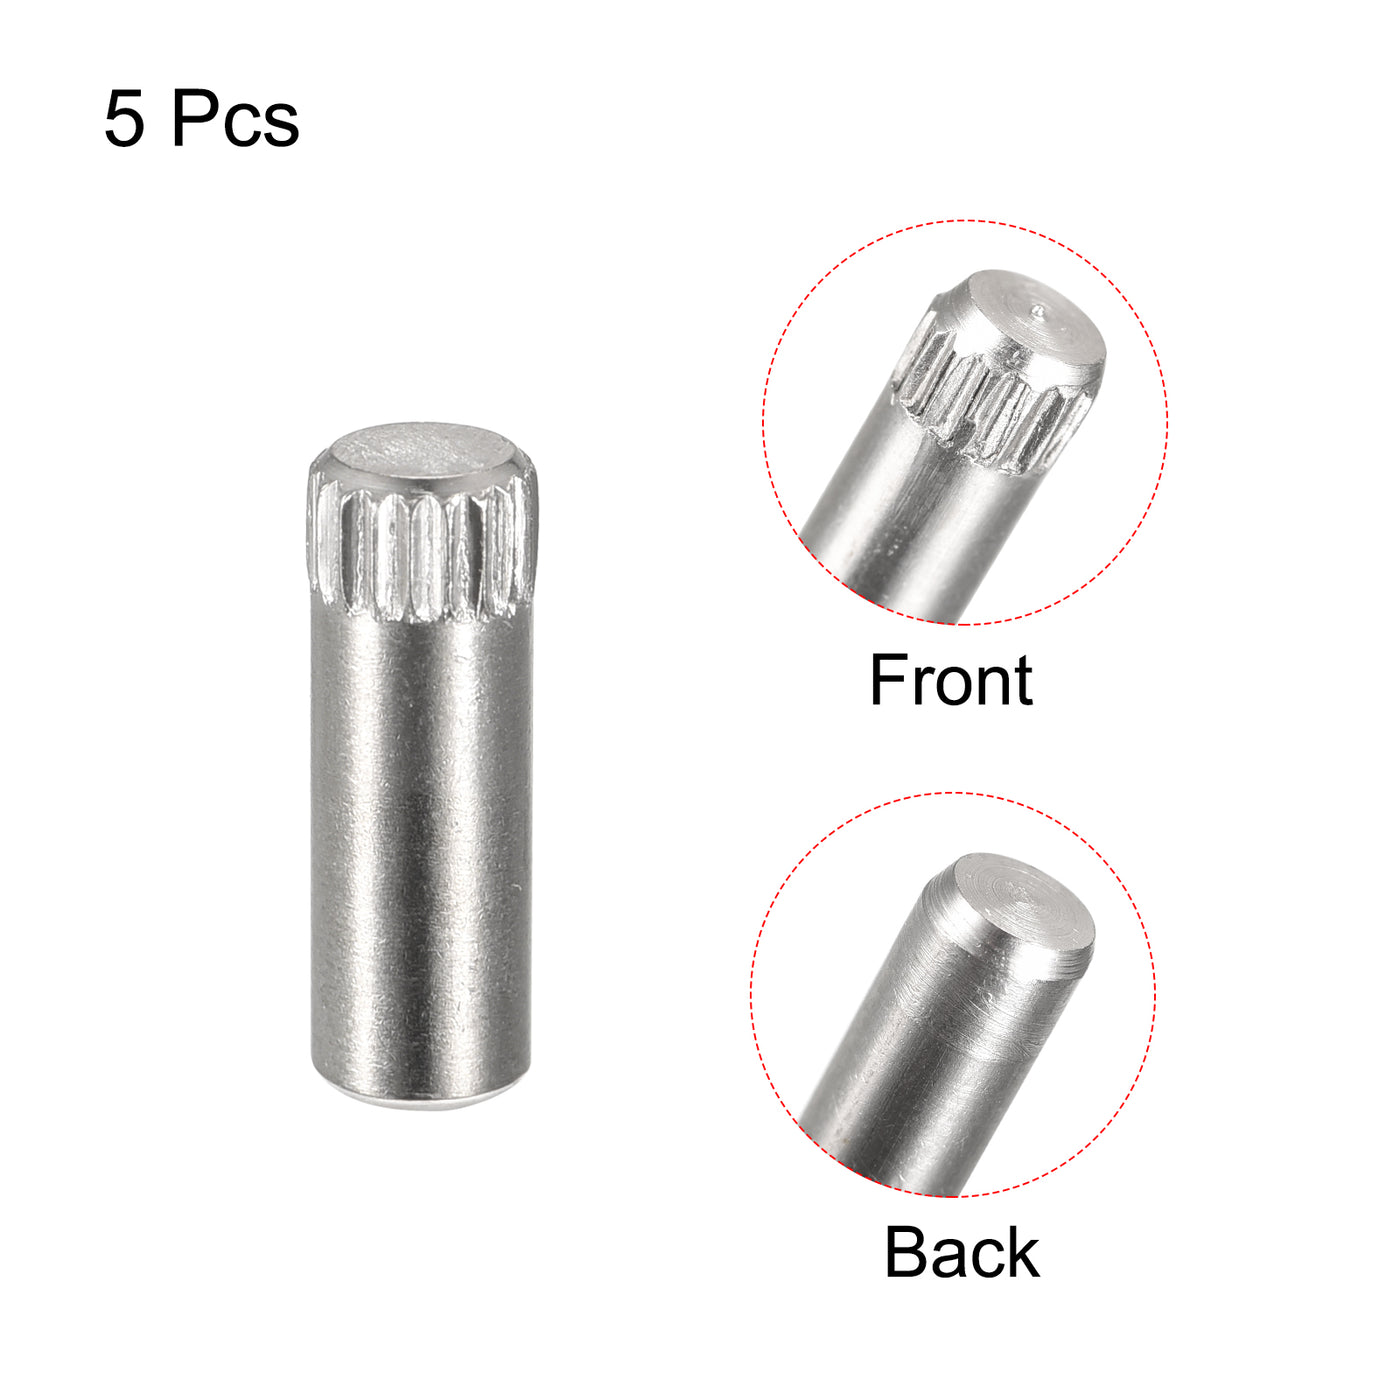 uxcell Uxcell 5x16mm 304 Stainless Steel Dowel Pins, 5Pcs Knurled Head Flat End Dowel Pin